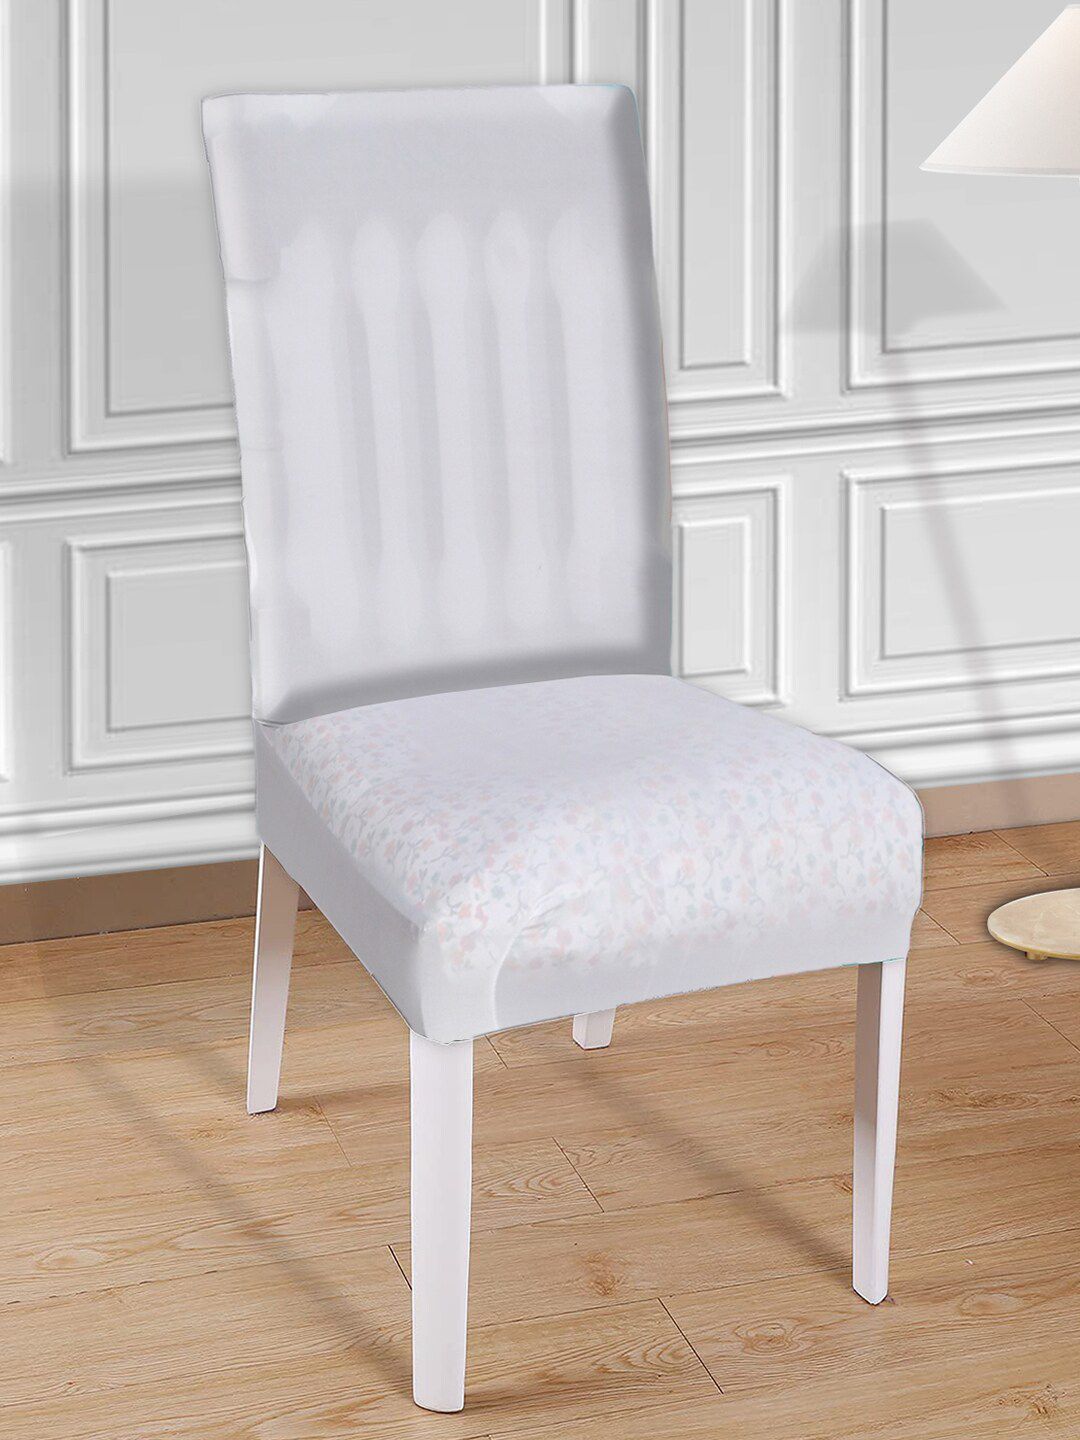 Kuber Industries White Solid Chair Cover Price in India